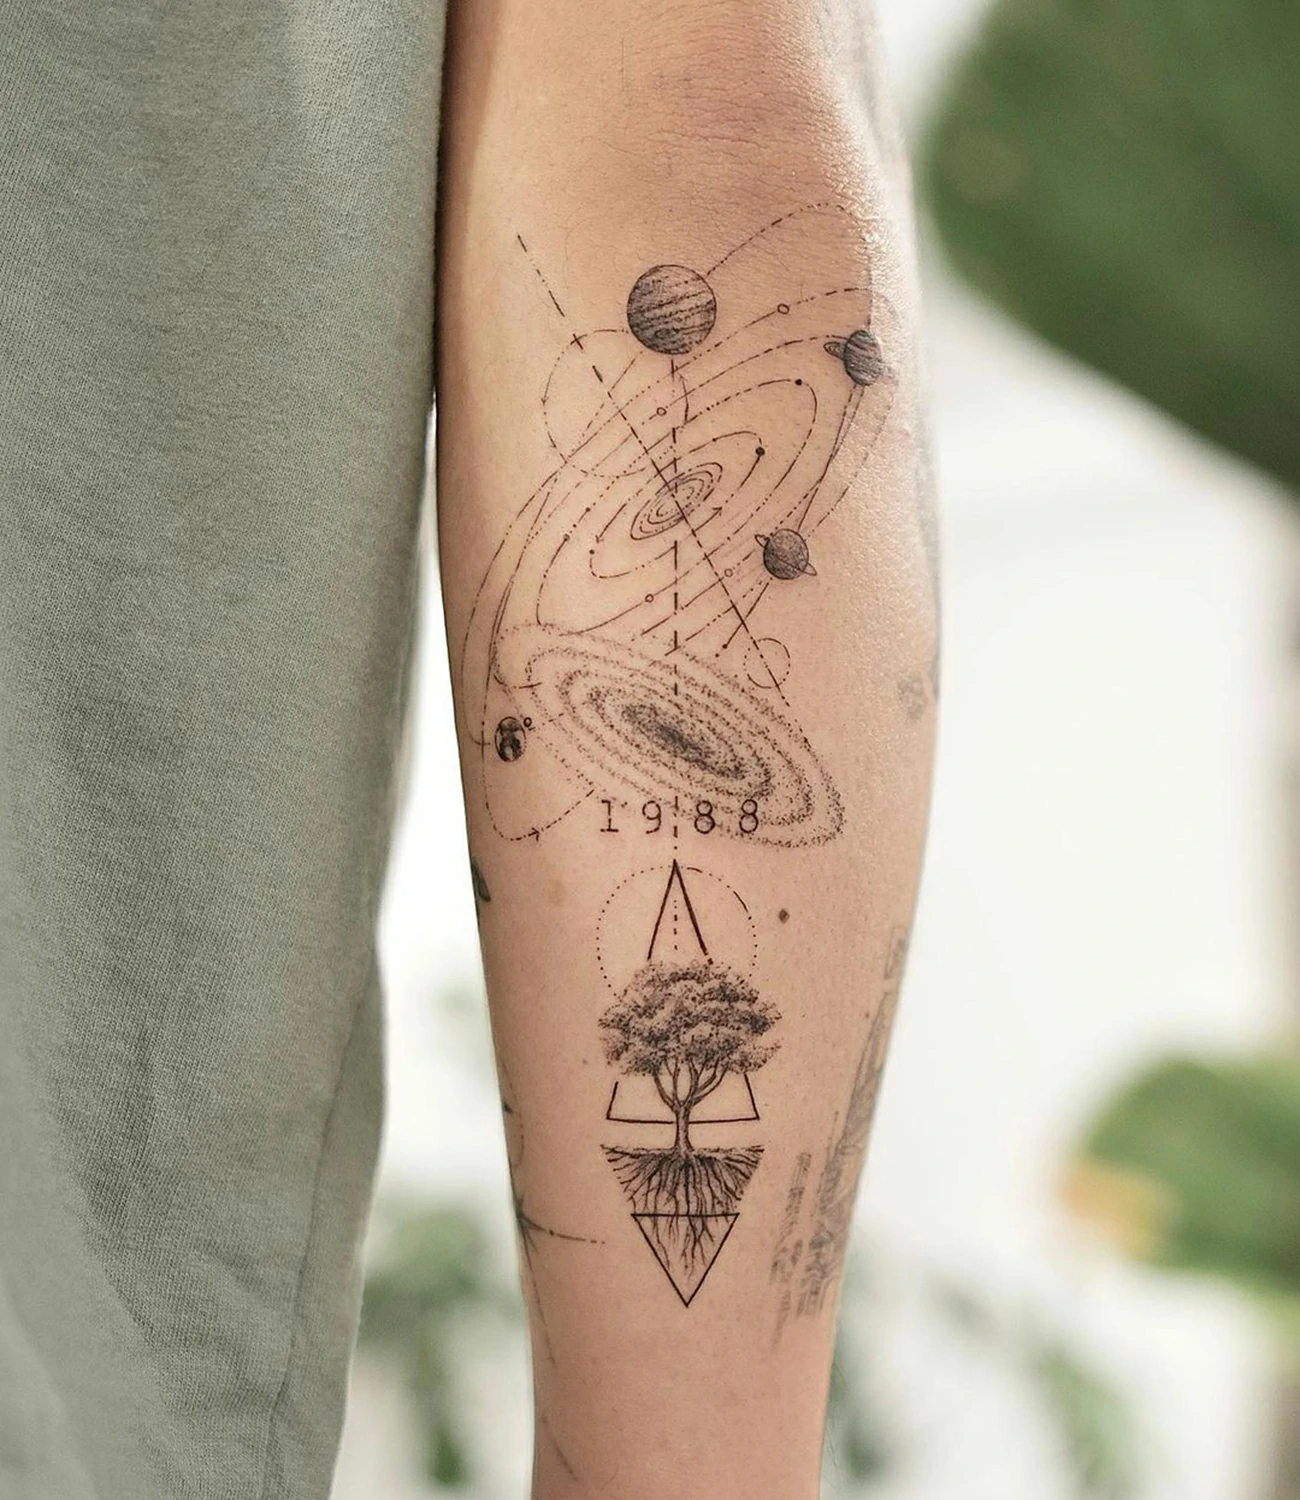 Geometric Space Tattoos
Geometric space tattoos combine celestial themes like stars, planets, and galaxies with intricate geometric patterns, creating designs that symbolize the infinite and mysterious nature of the universe.